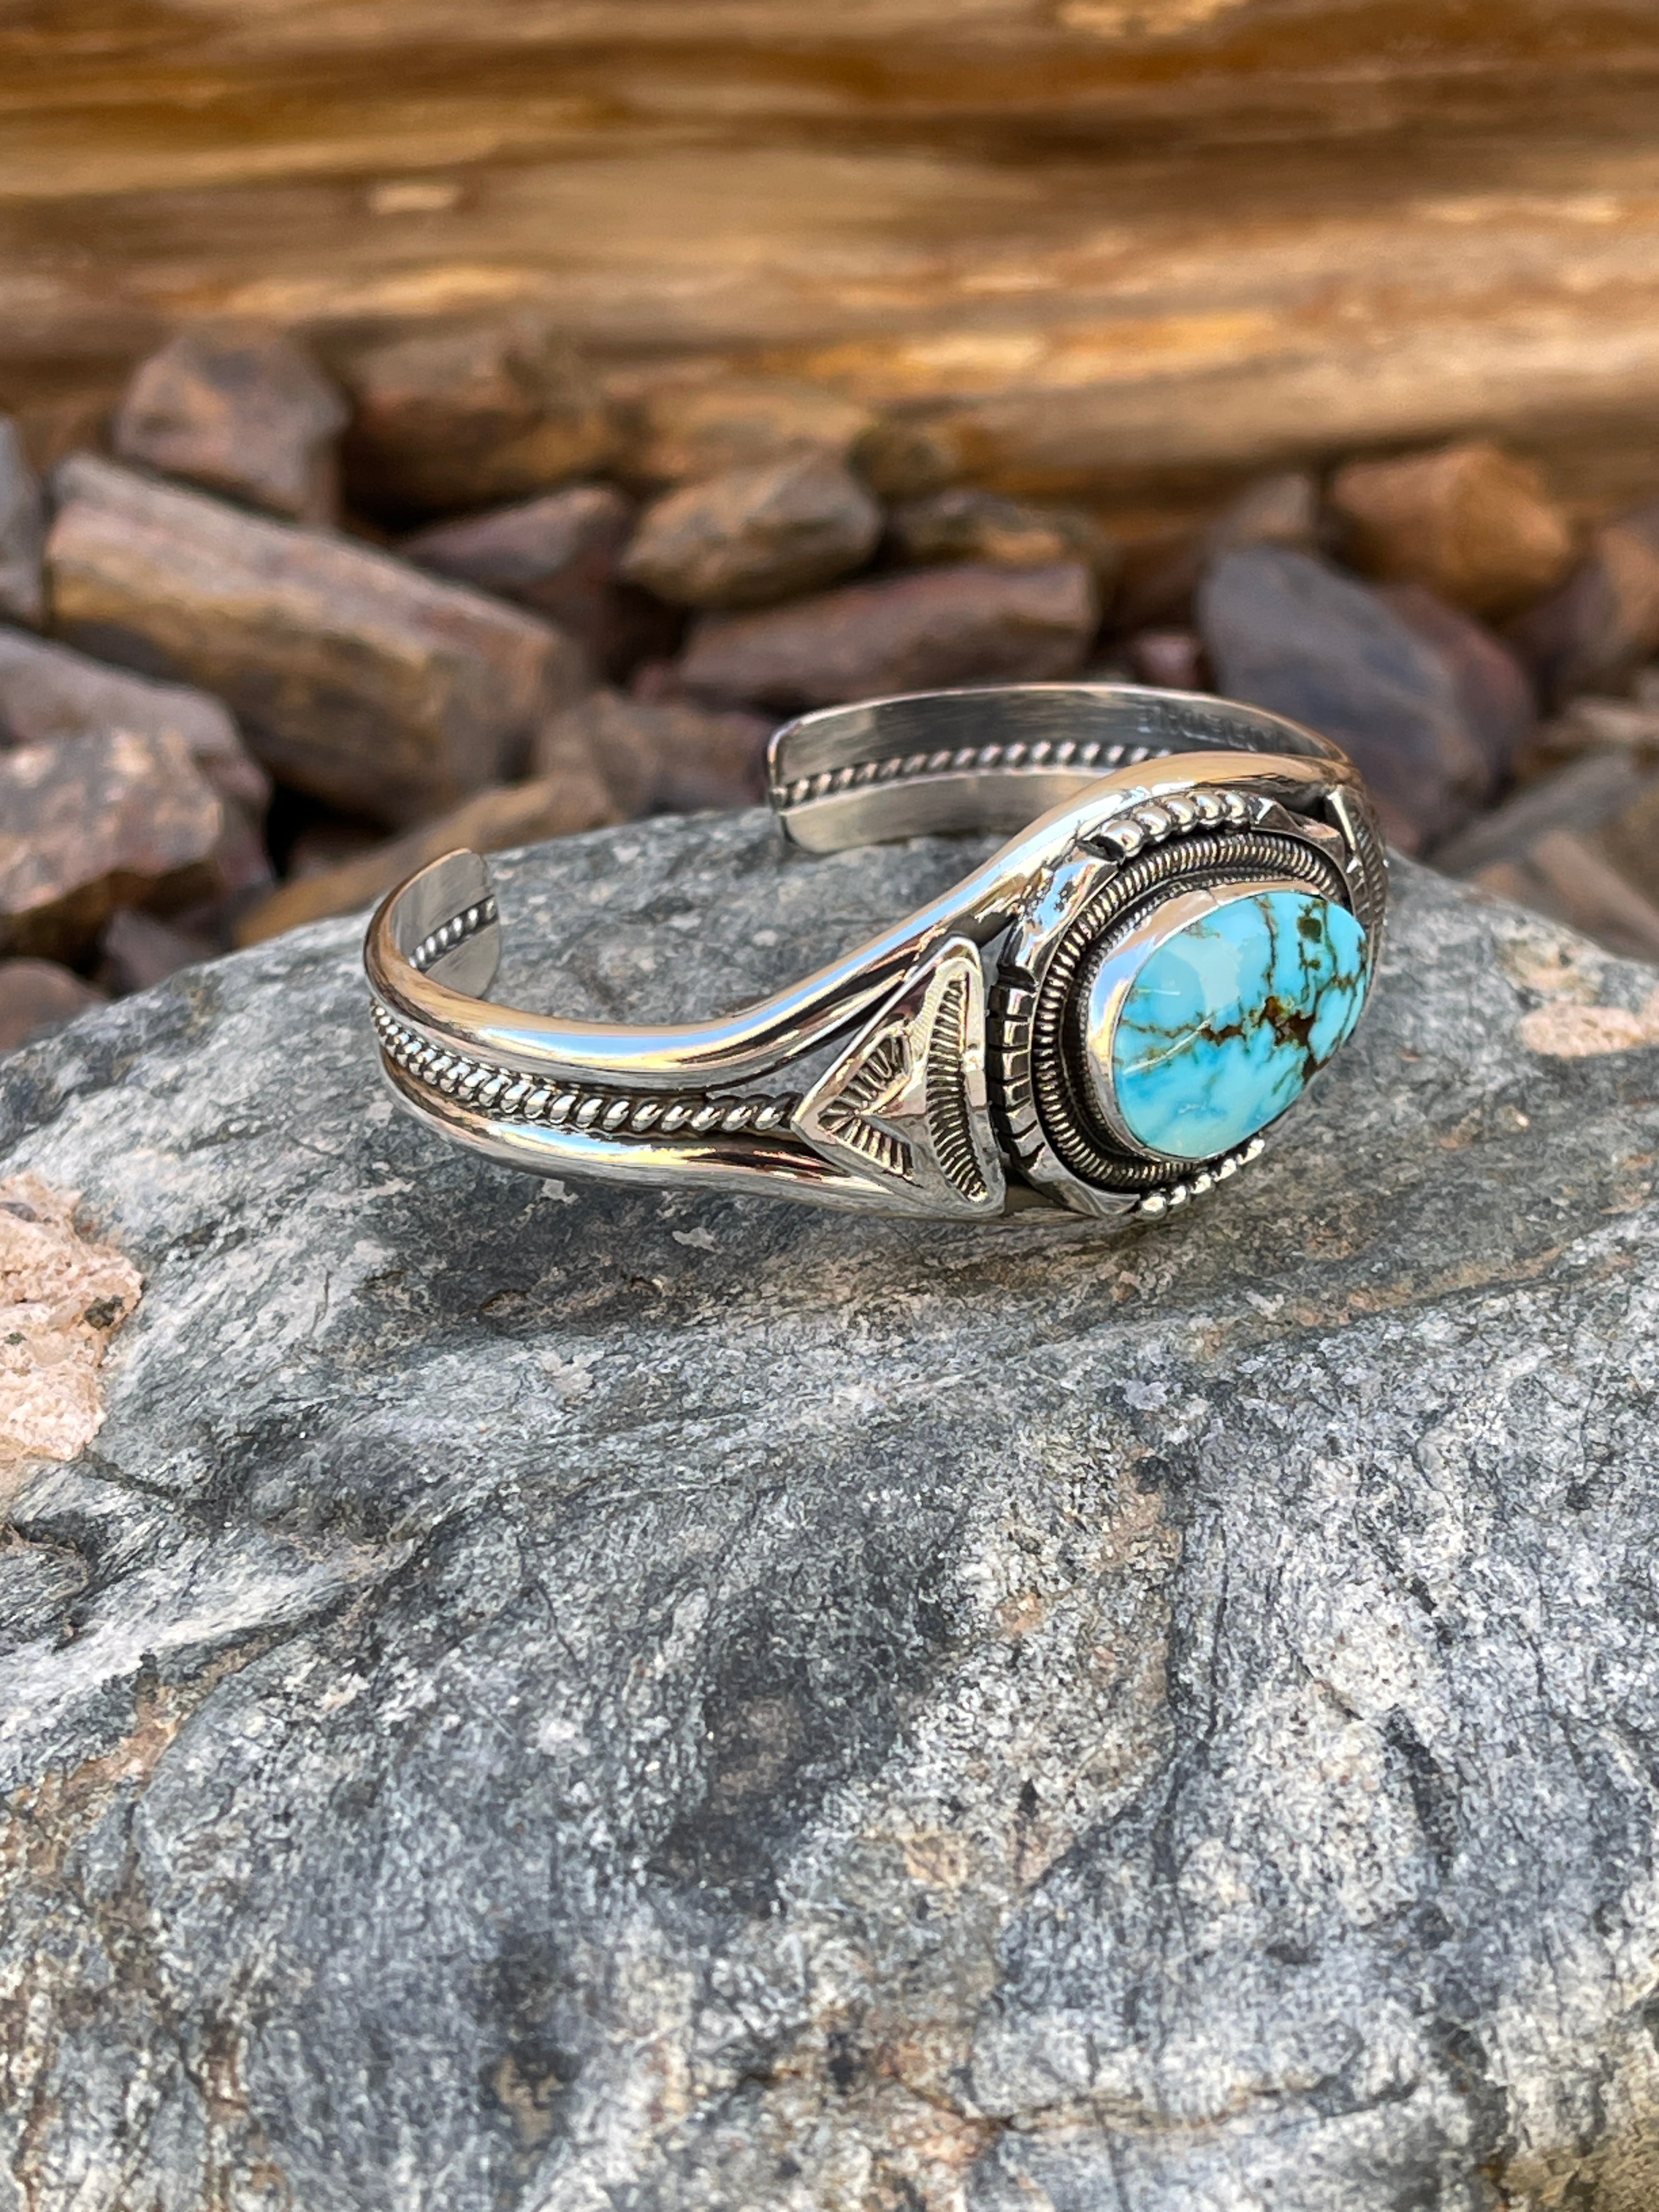 Handmade Solid Sterling Silver Turquoise Mountain Turquoise Bracelet with Coil Accent